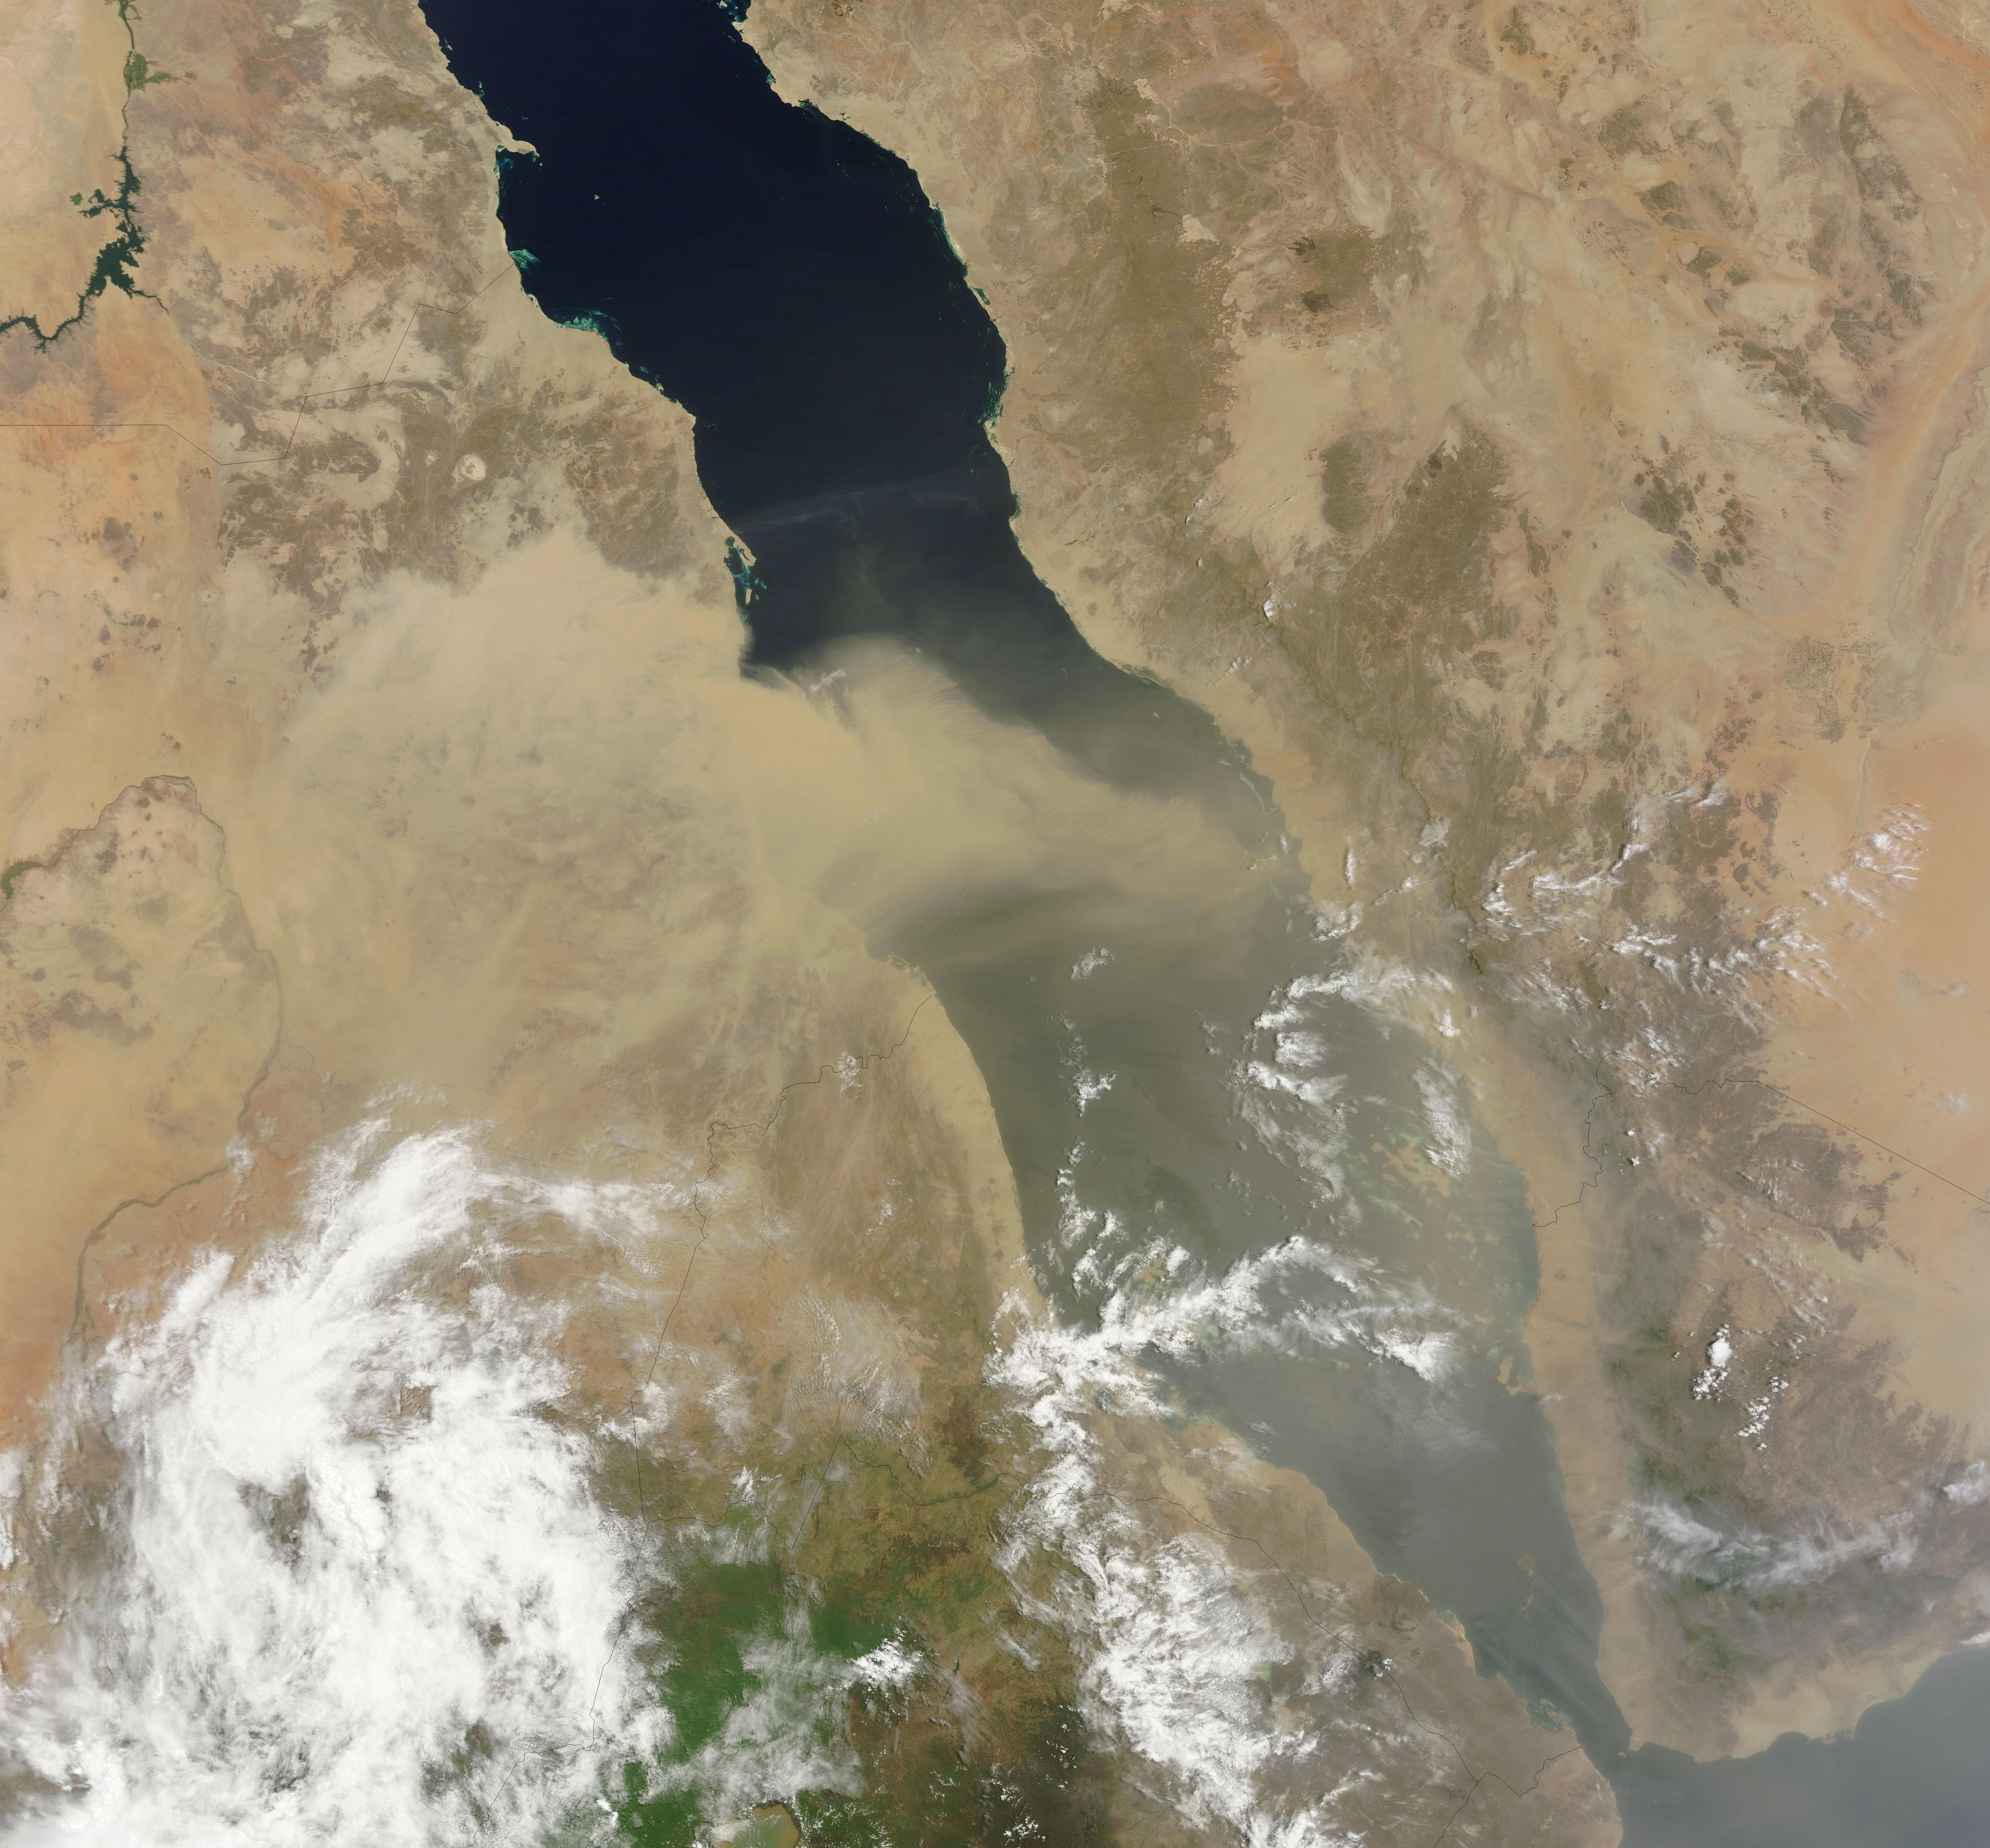 Dust Plumes over the Red Sea - related image preview